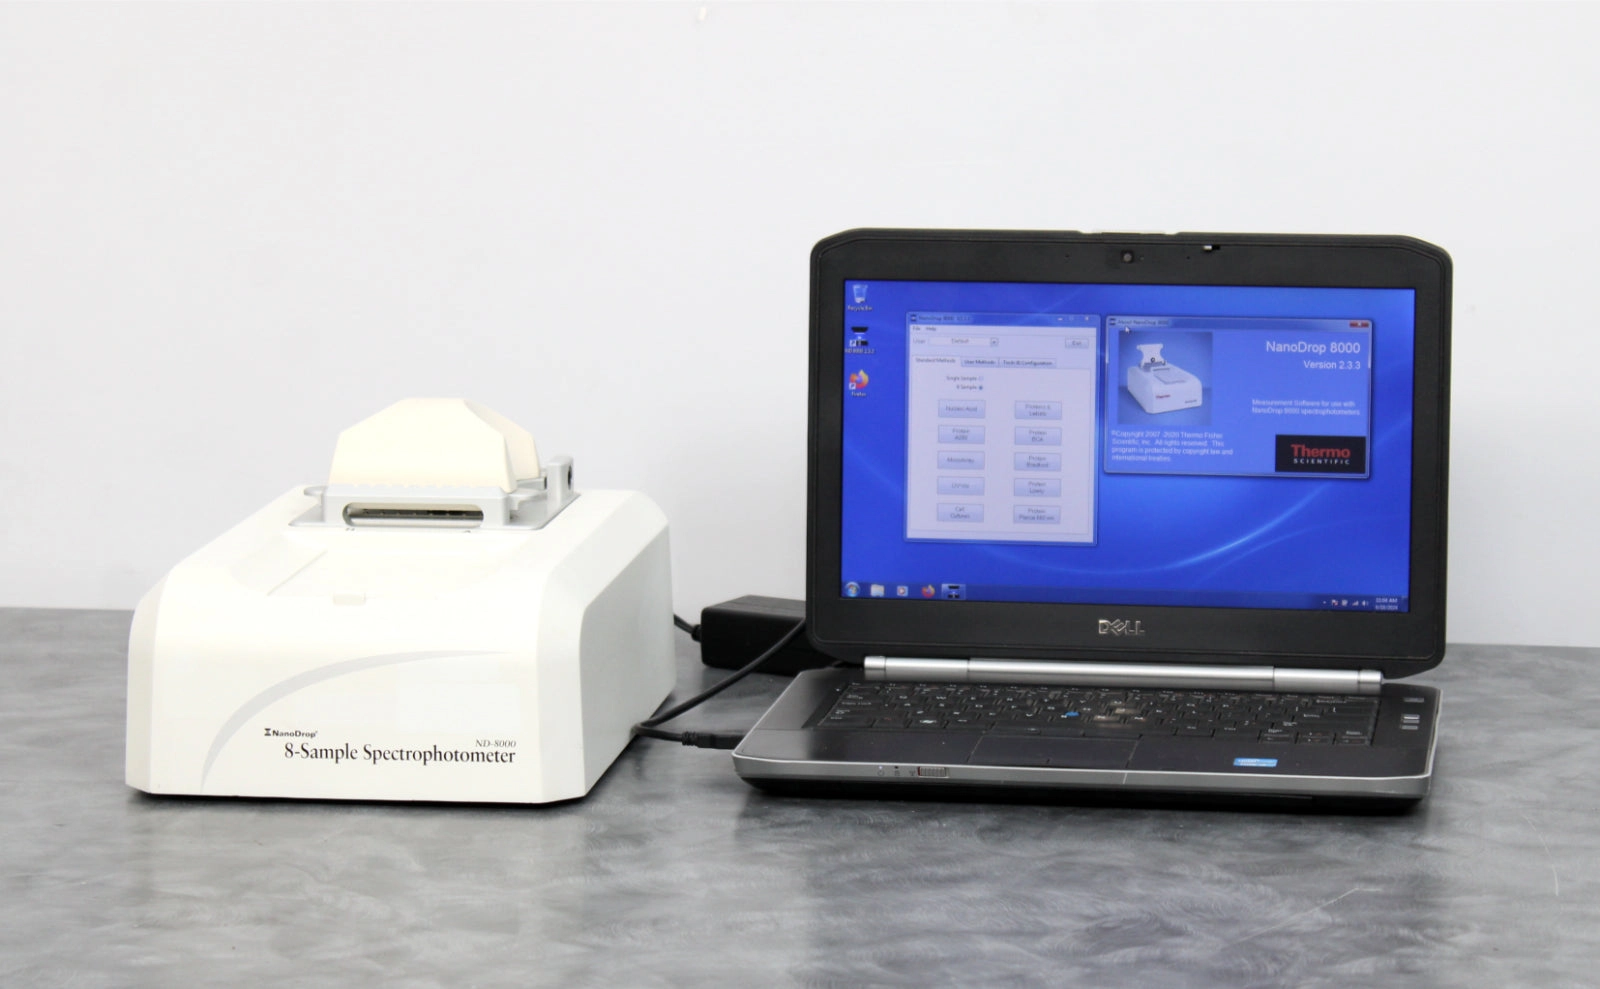 NanoDrop ND-8000 UV-VIS Spectrophotometer with Laptop and Software